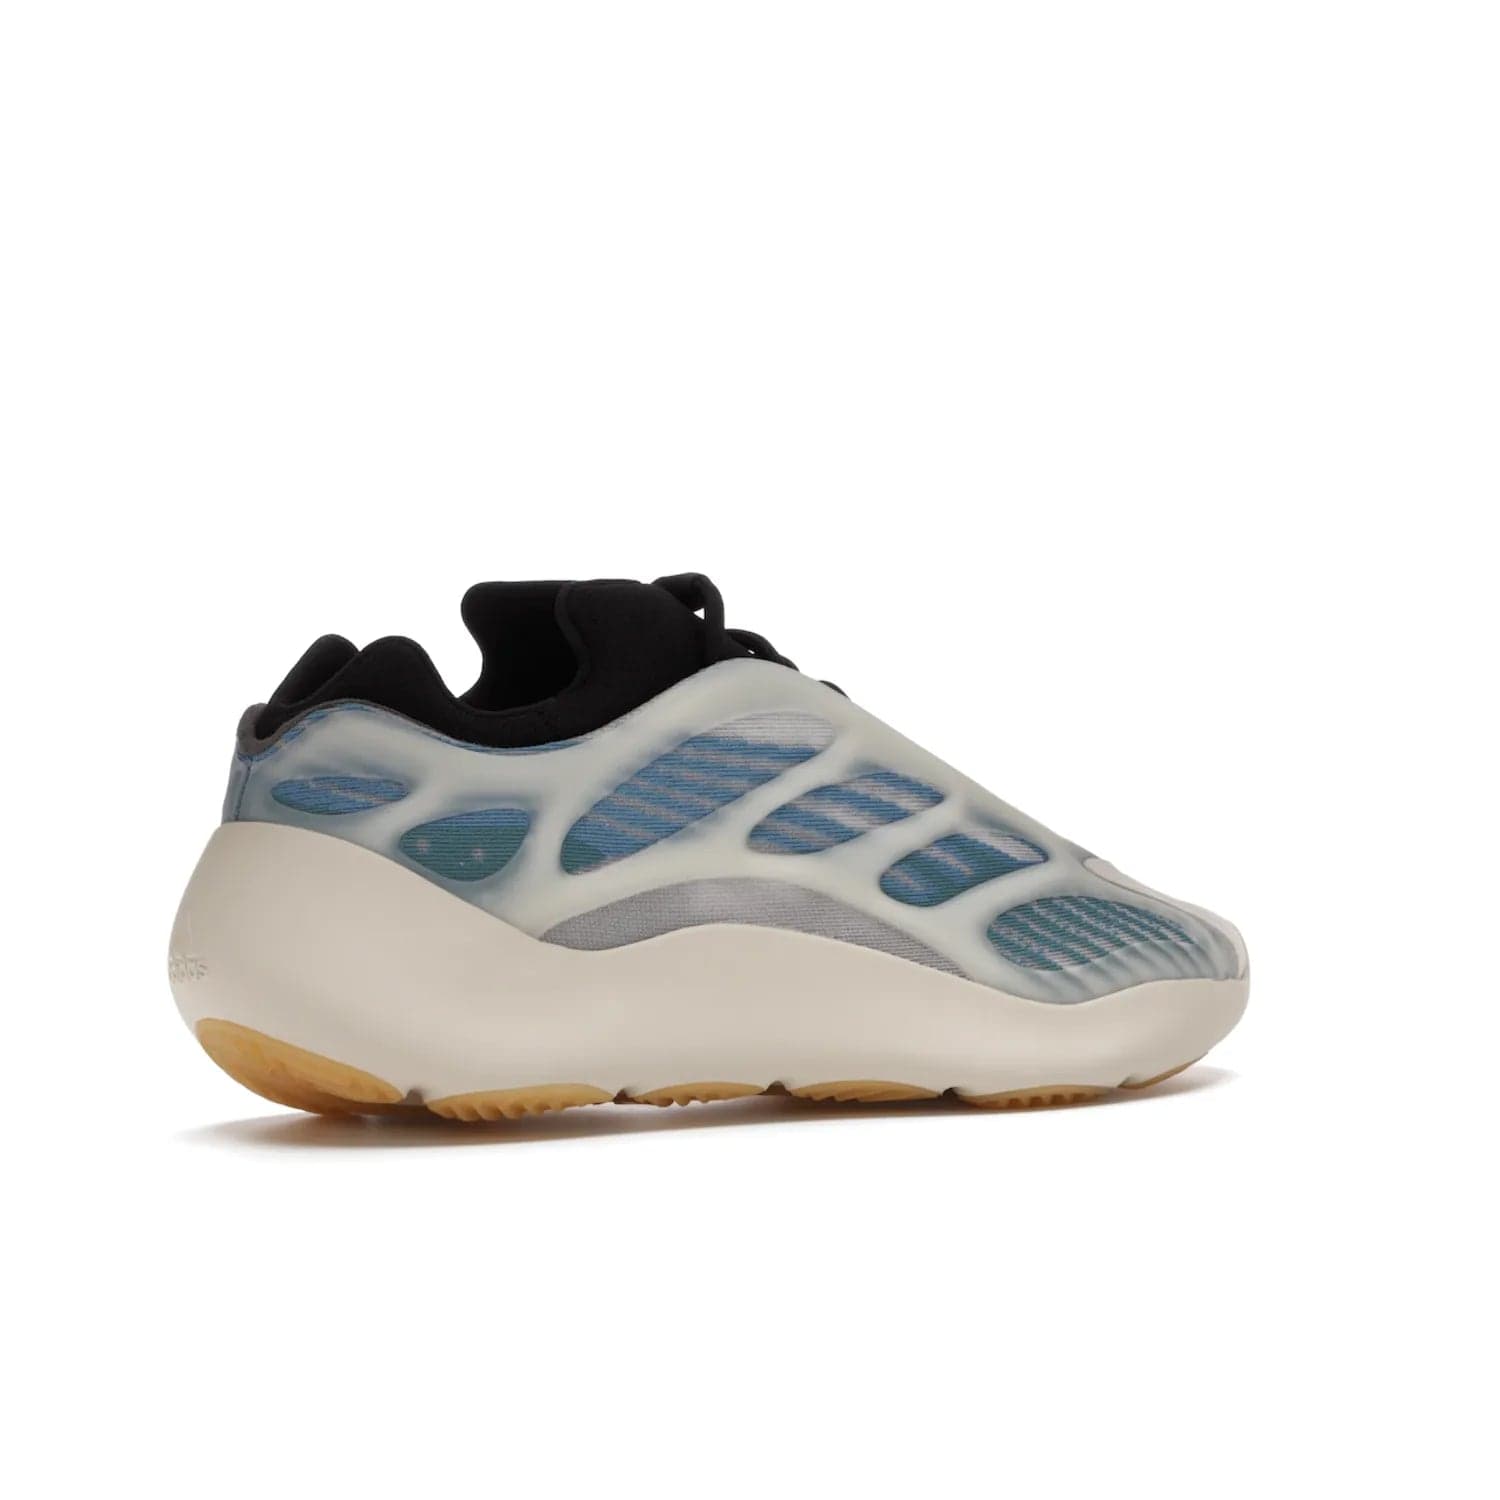 adidas Yeezy 700 V3 Kyanite - Image 34 - Only at www.BallersClubKickz.com - The adidas Yeezy 700 V3 Kyanite offers a layered design featuring a glow-in-the-dark TPU cage and a tonal cream-colored EVA foam midsole. With its herringbone-patterned outsole, the style and comfort of the sneaker will accompany you anywhere. Released in March 2021, it's a great addition to any sneaker wardrobe.